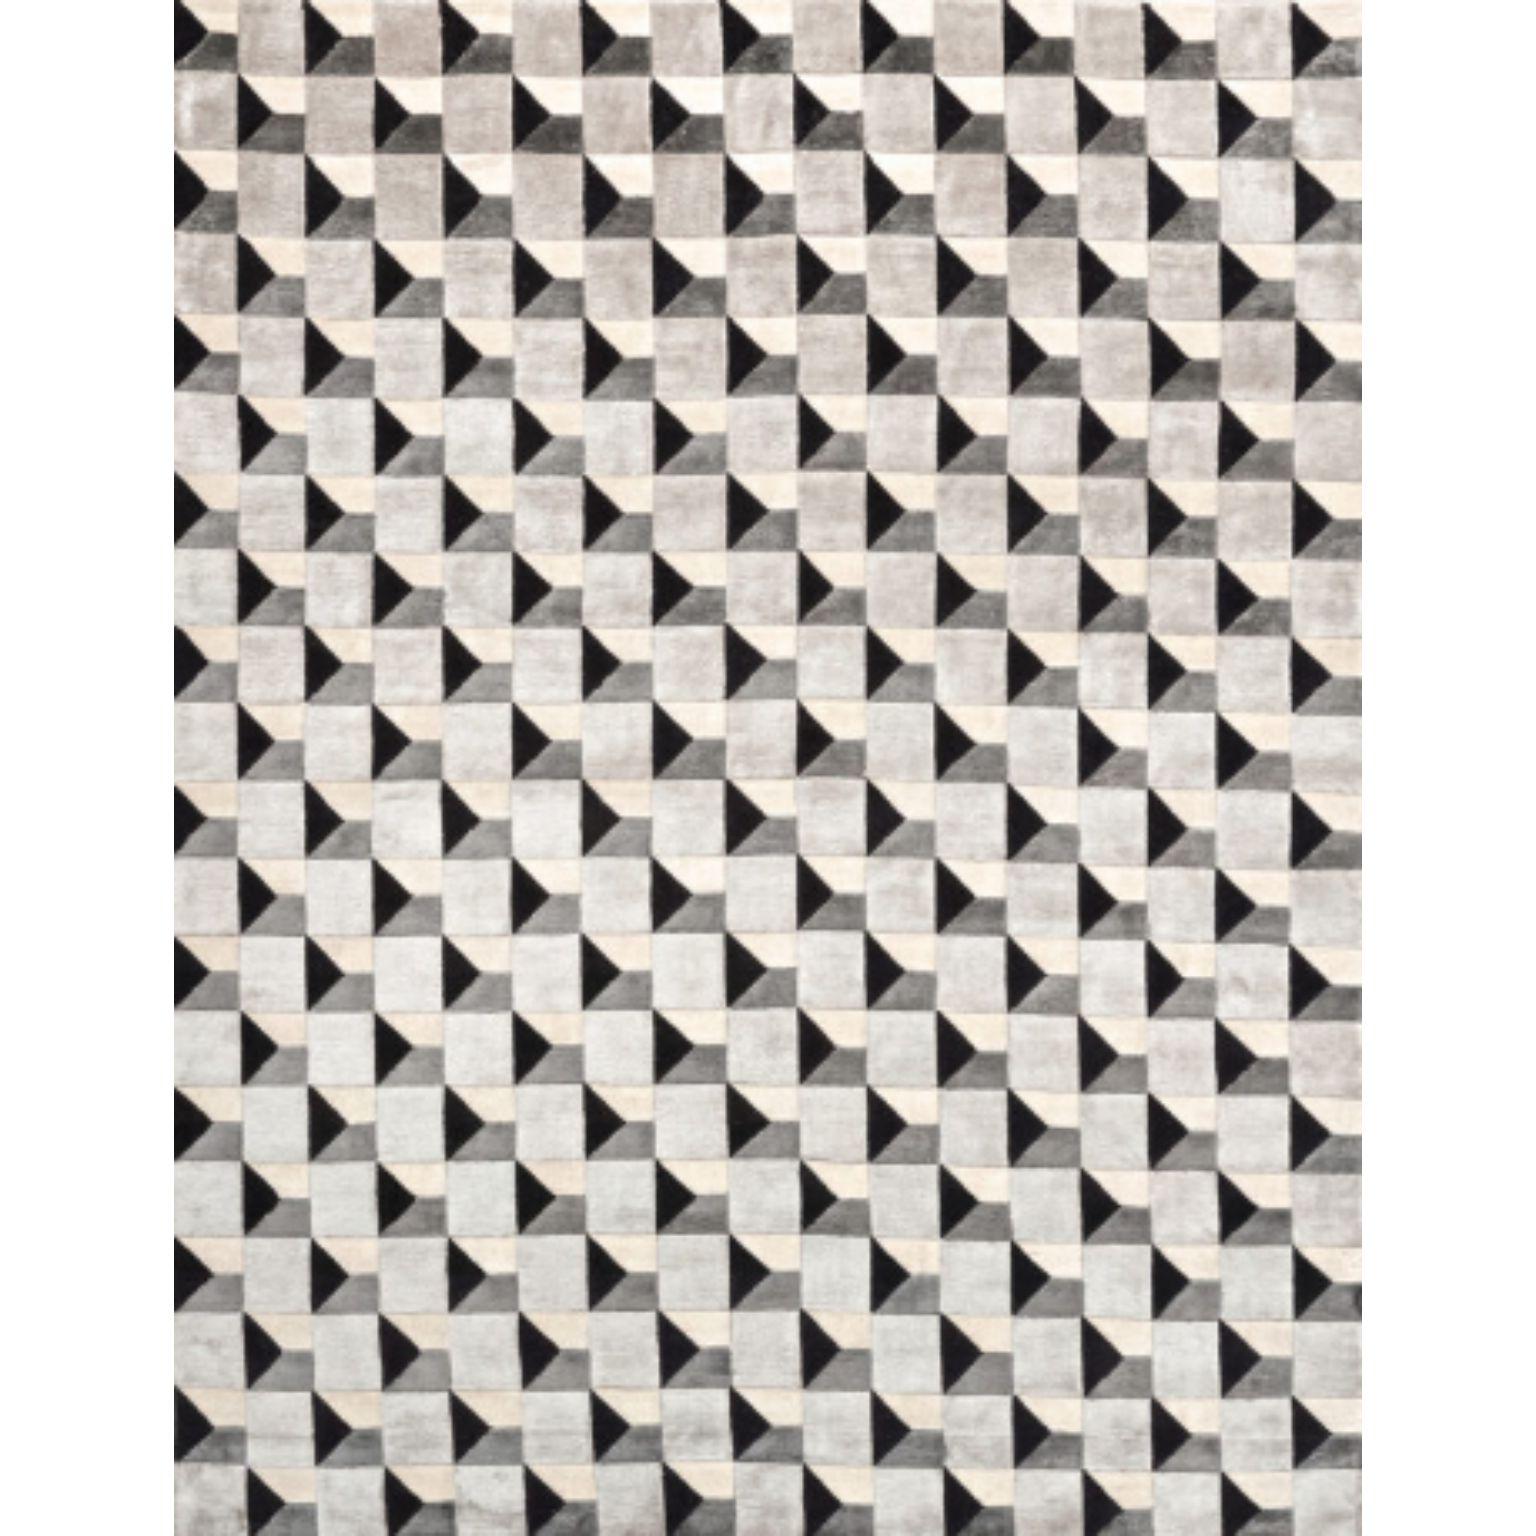 GRID 200 Rug by Illulian
Dimensions: D300 x H200 cm 
Materials: Wool 50%, Silk 50%
Variations available and prices may vary according to materials and sizes. Please contact us.

Illulian, historic and prestigious rug company brand,